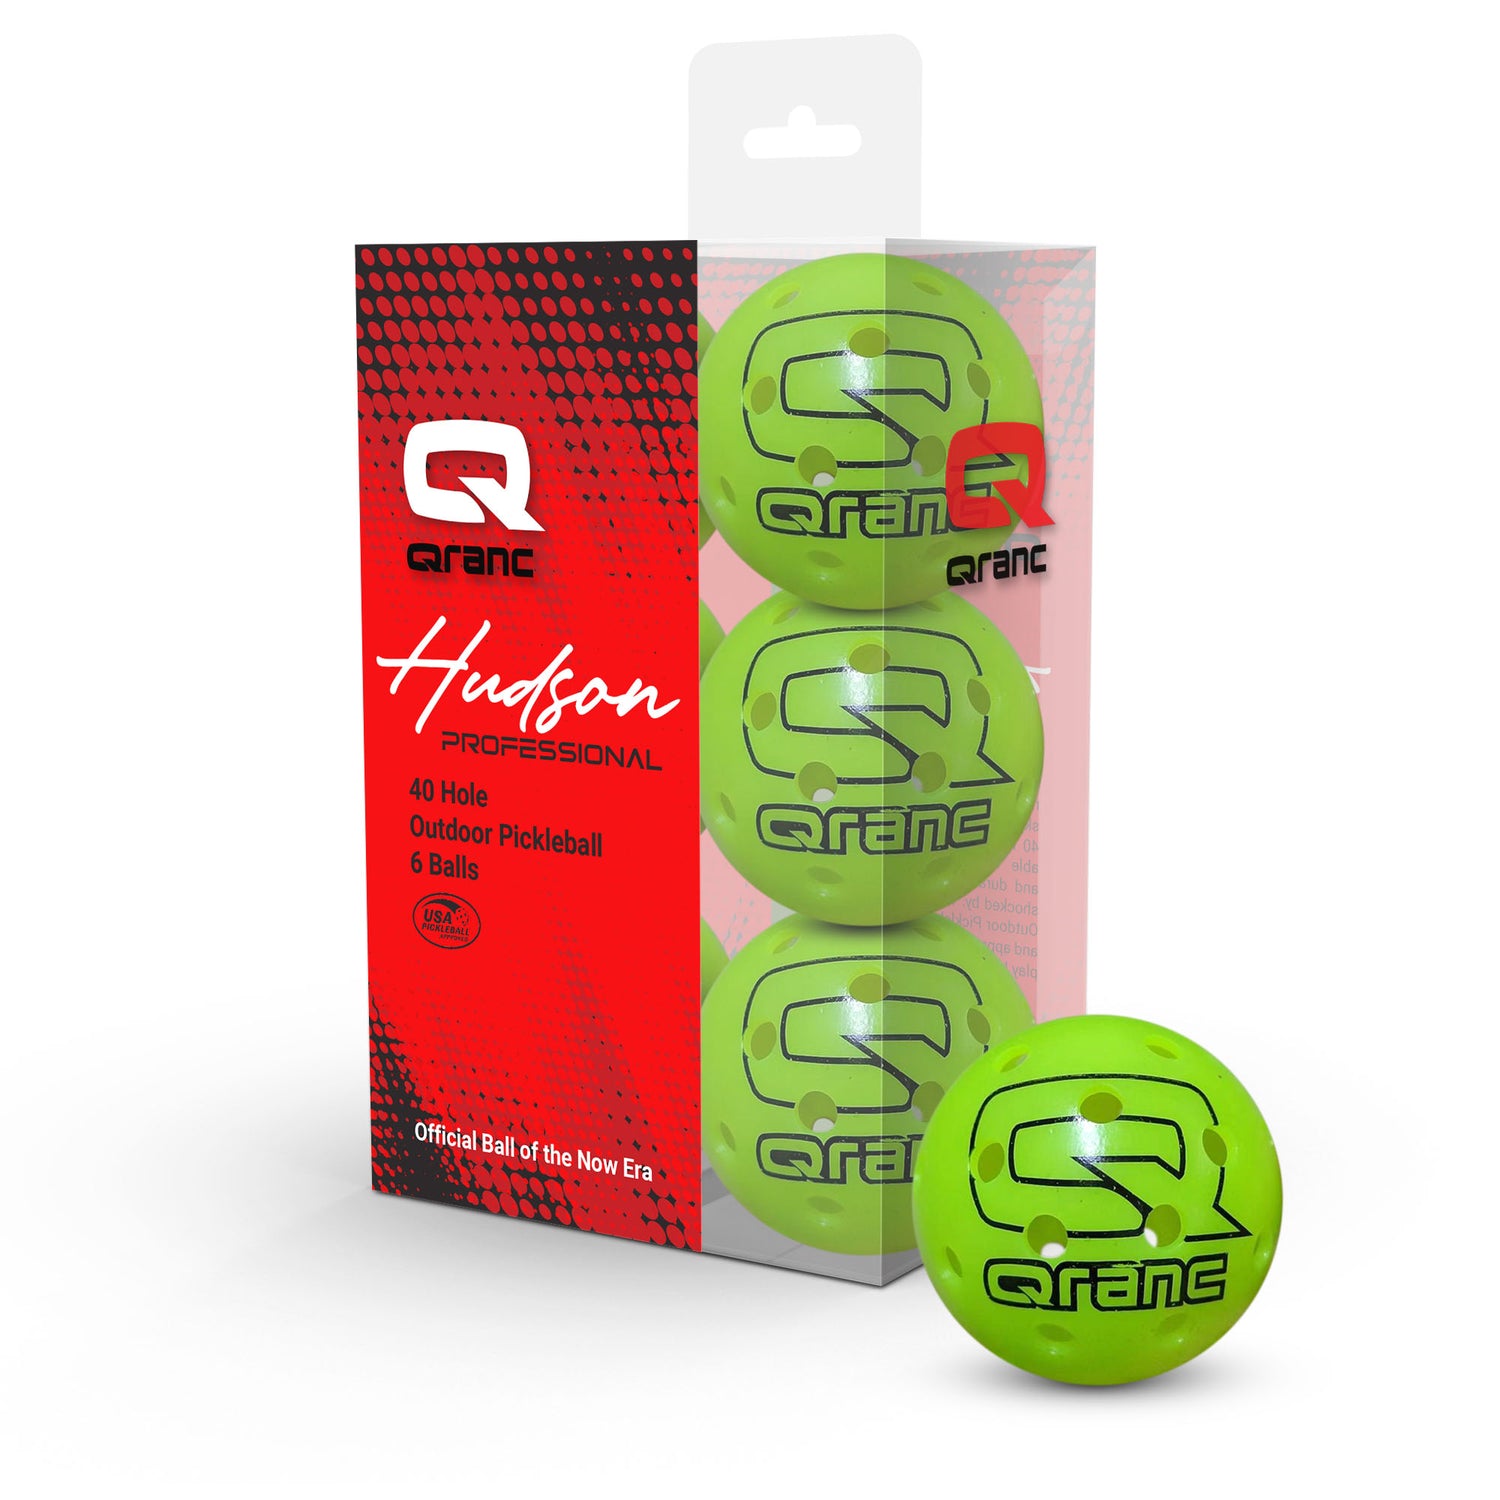 Qranc's Professional Pickleball 144 Pack | Premium Pickleballs Approved for Competitive Play Shipped to Your Door